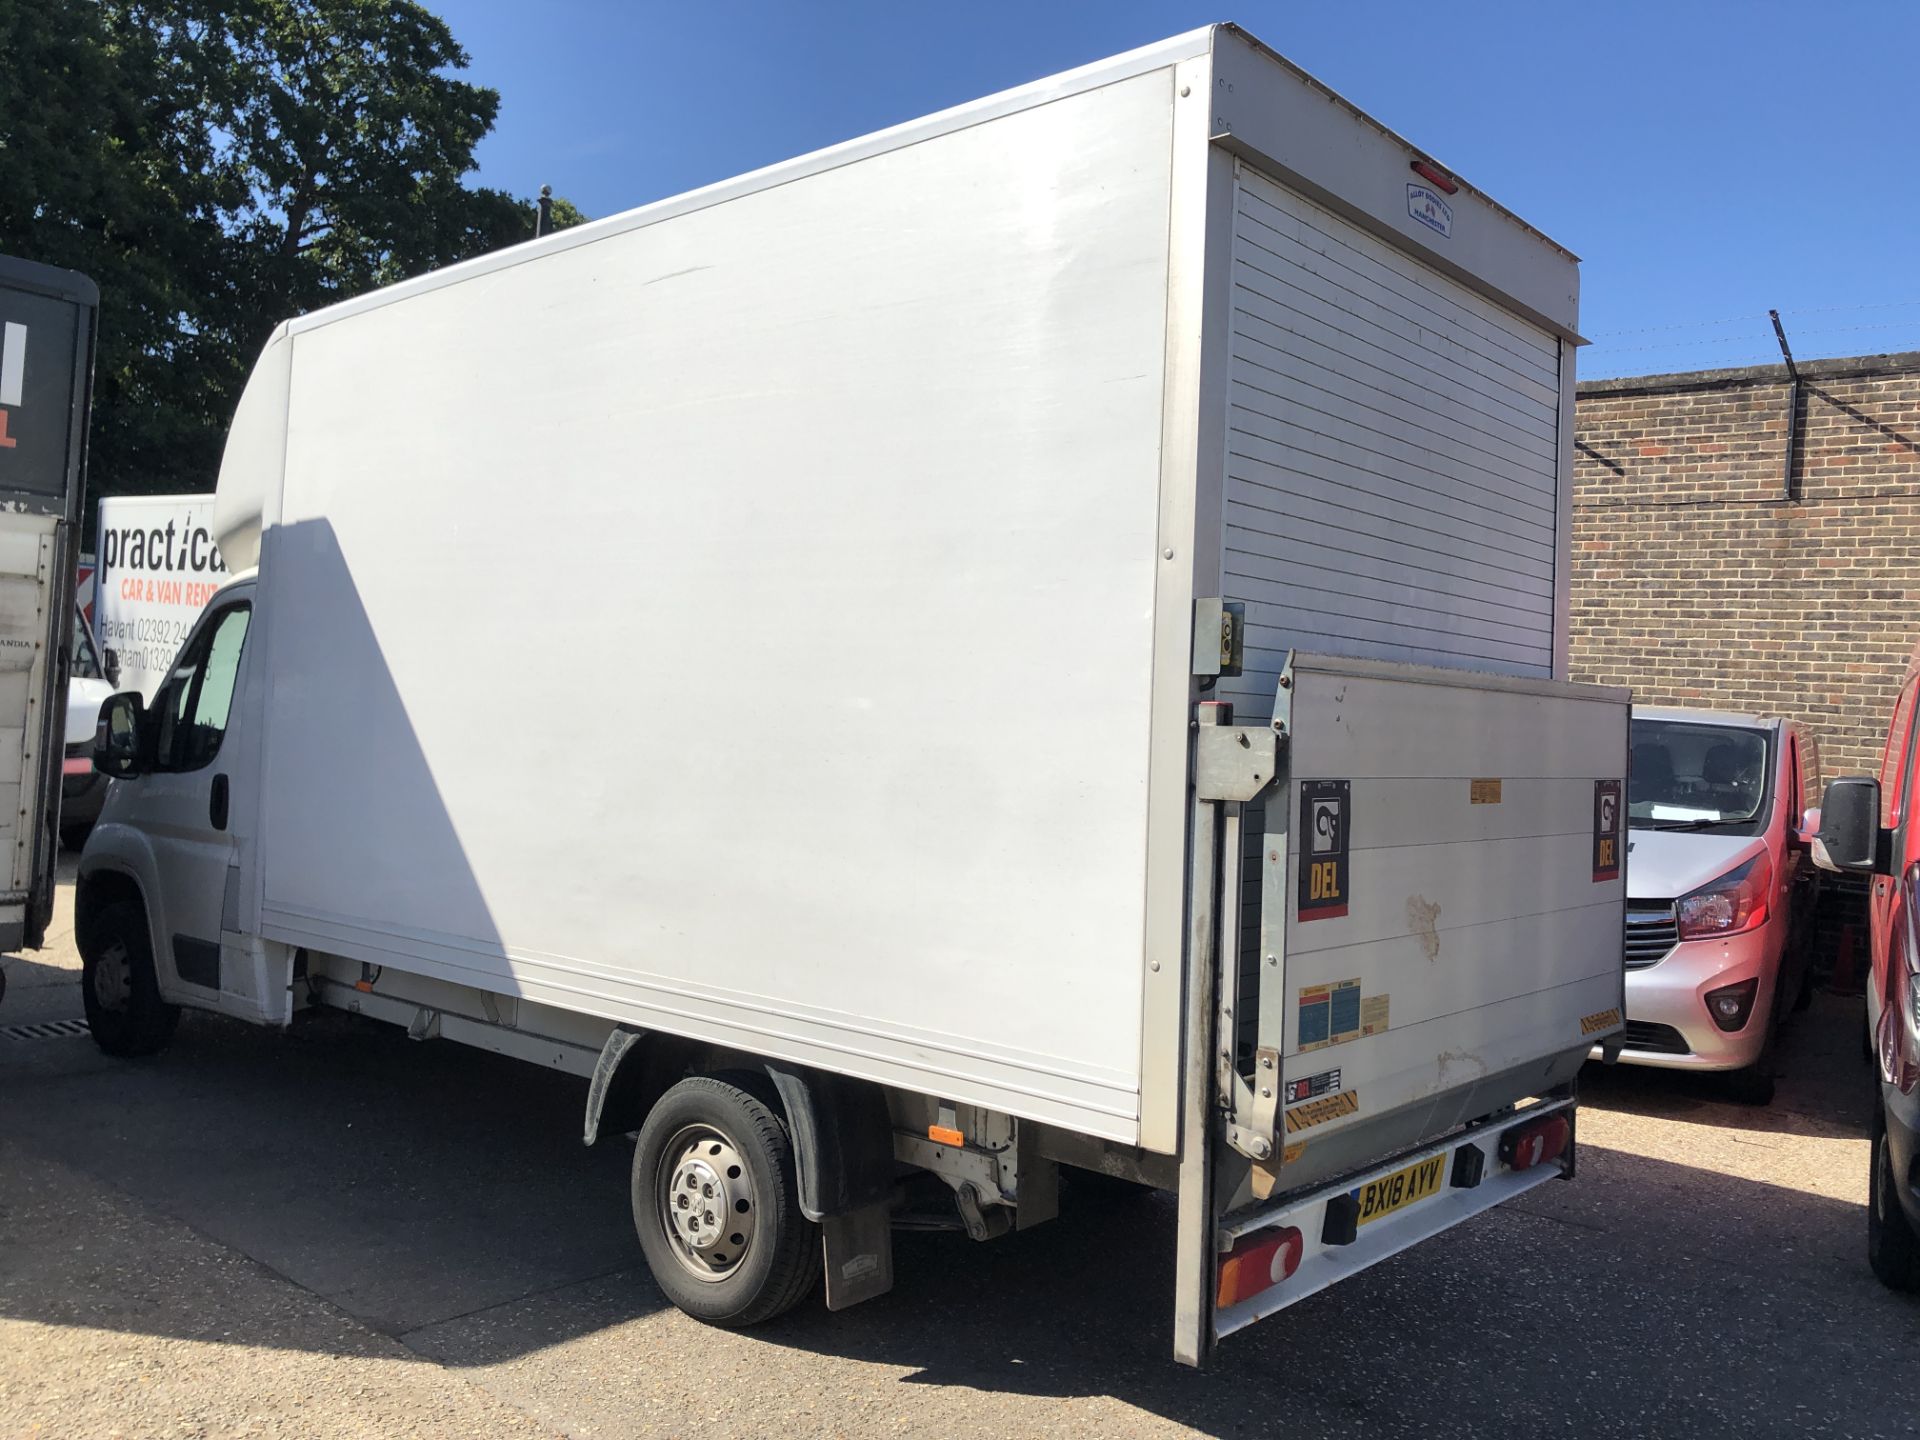 Peugeot Boxer 335 L3 Blue HDI Luton Van with tail lift - Image 6 of 9